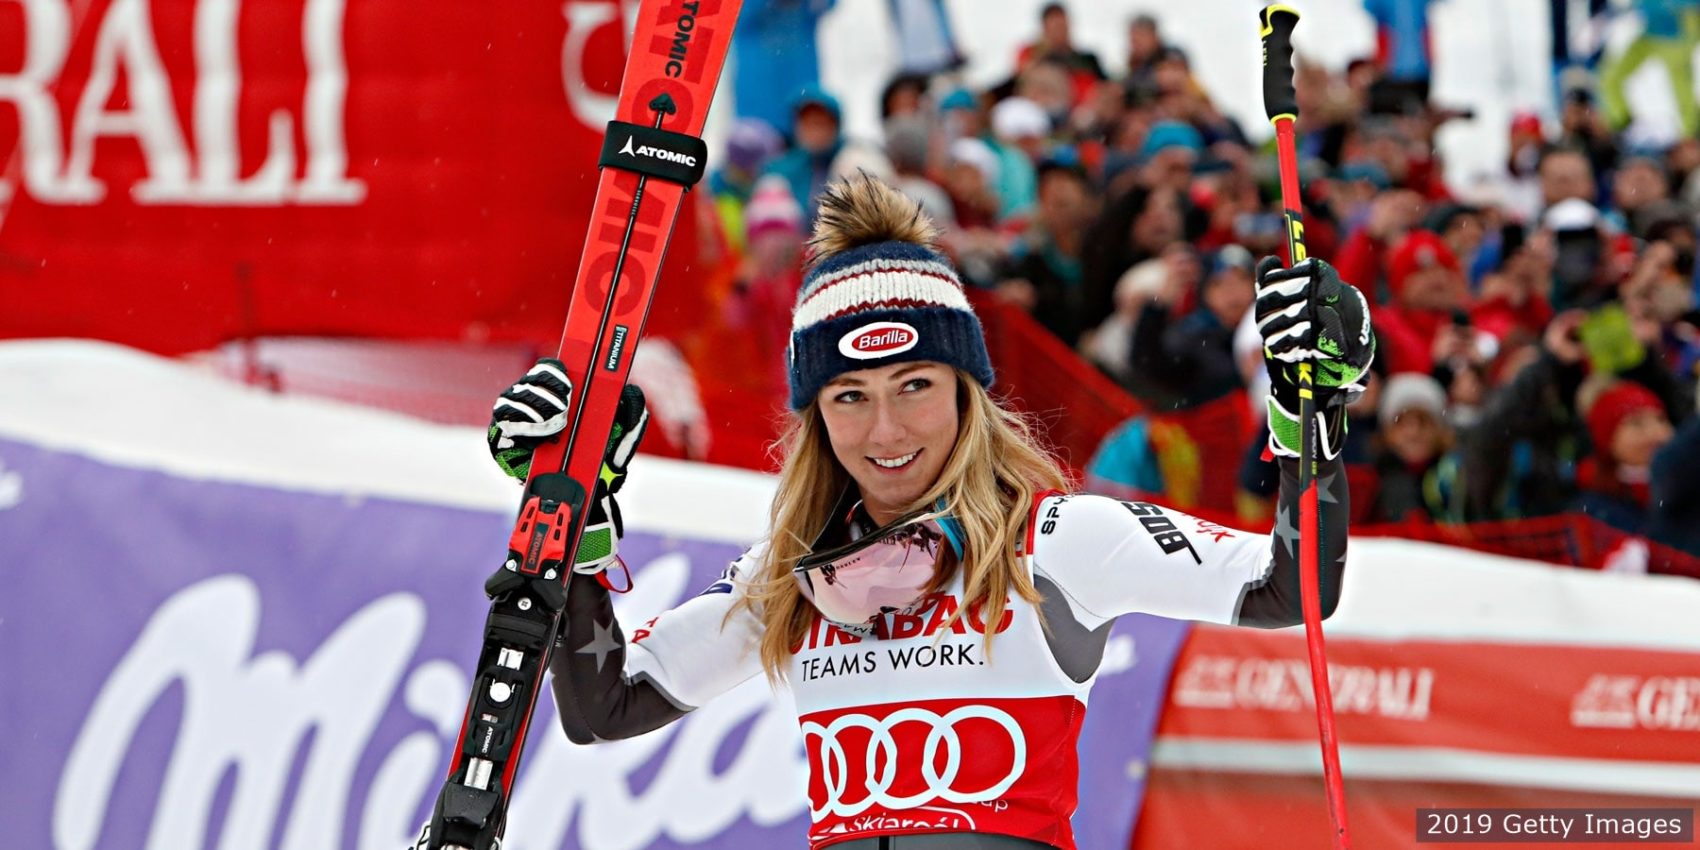 Mikaela Shiffrin broke record with 17 world cup titles in one season